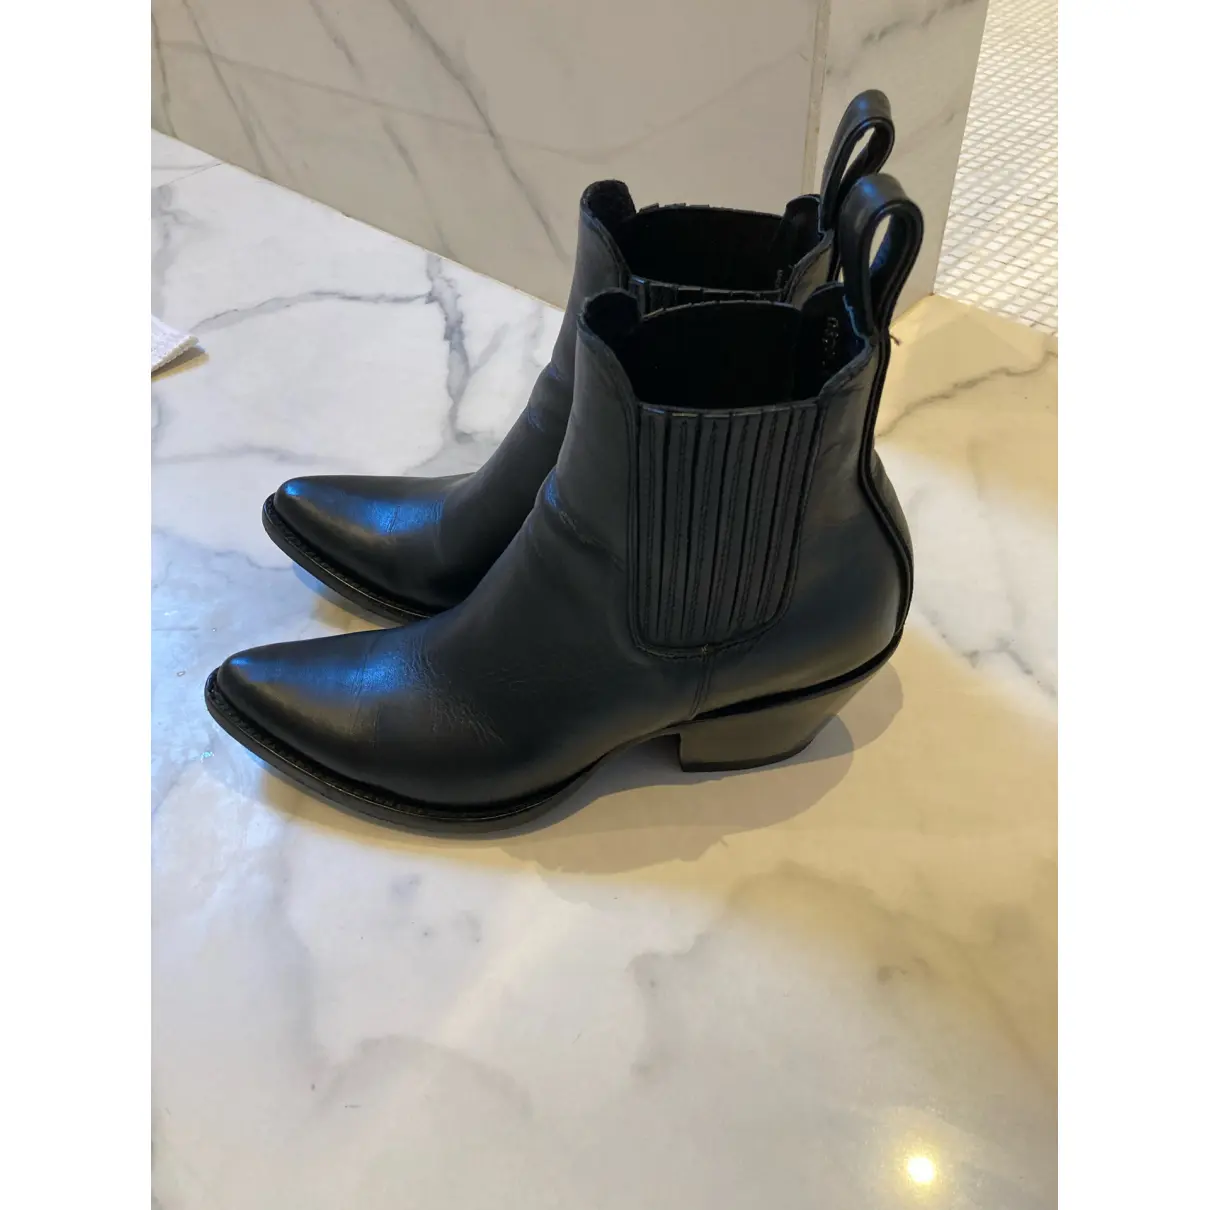 Buy Mexicana Leather ankle boots online